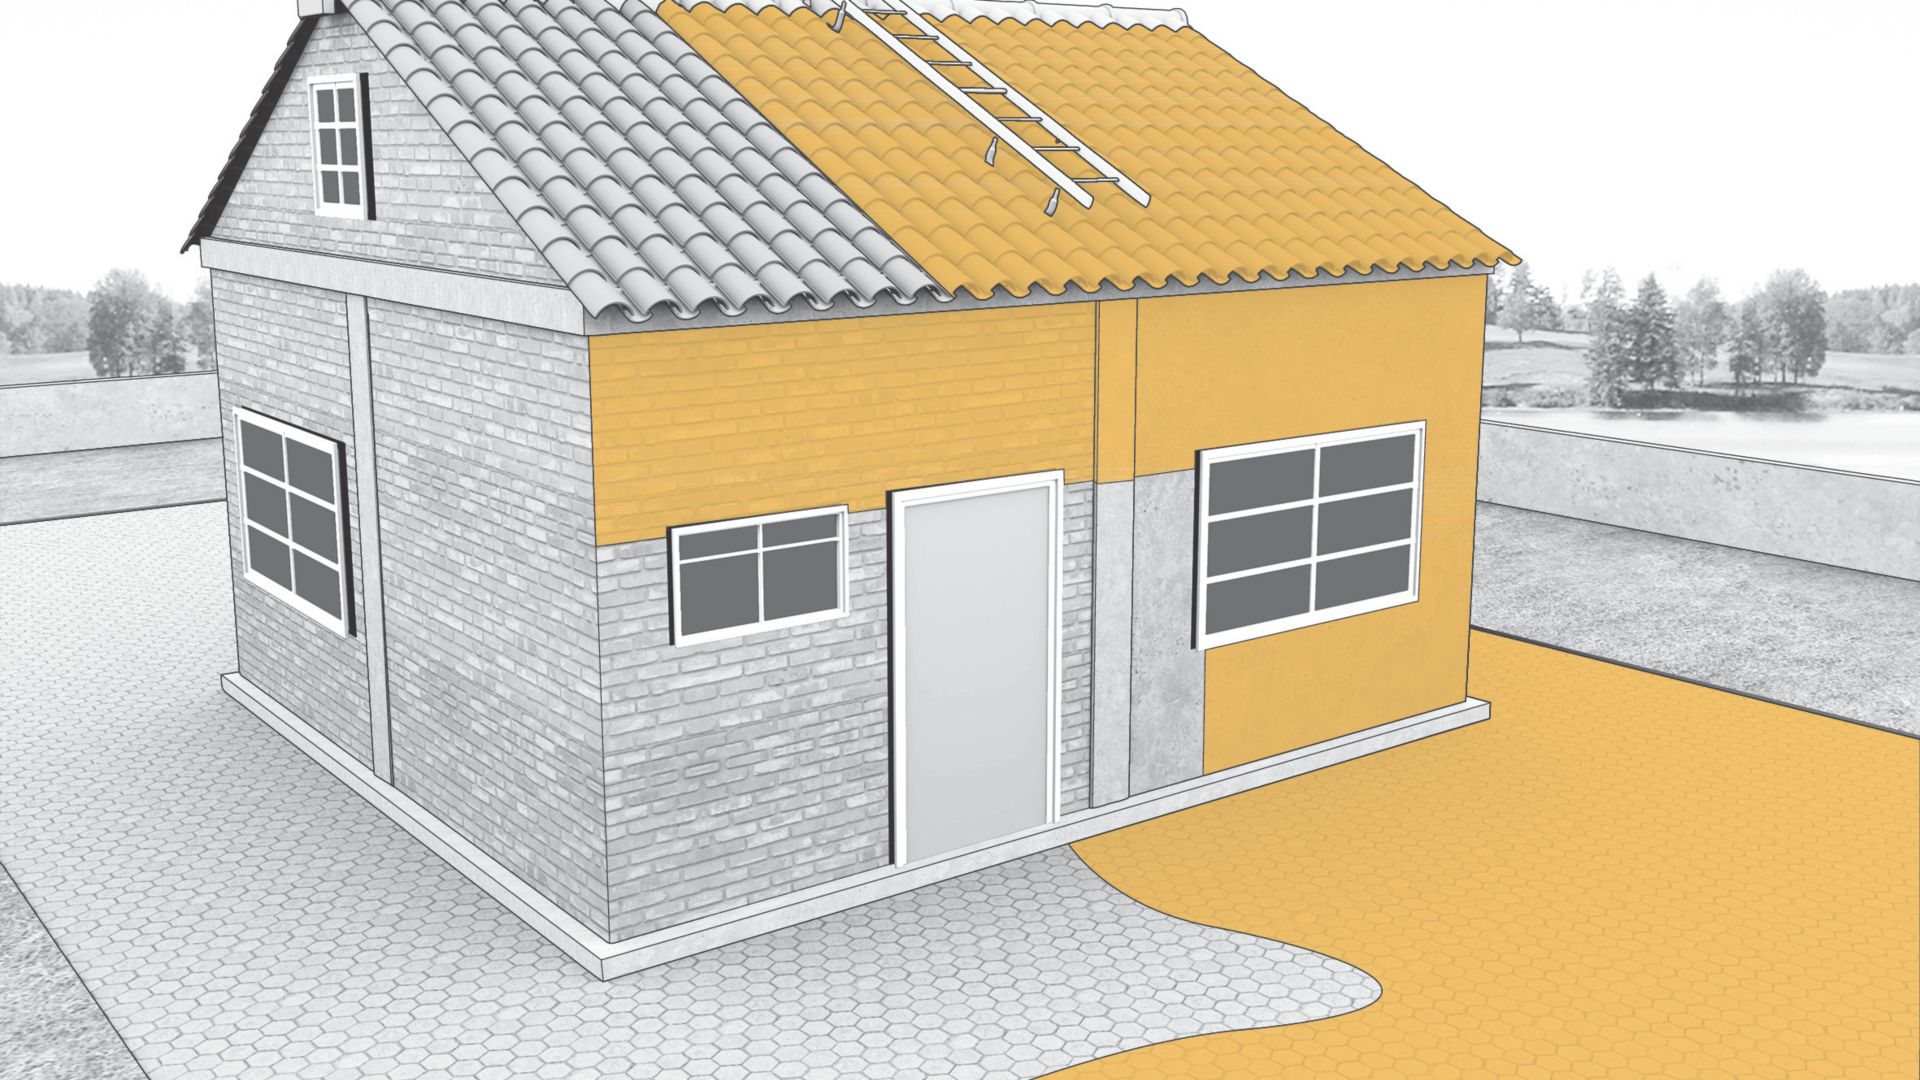 Illustration of Sikagard protect product applied to house building roof tiles, brick facade, stone pavement